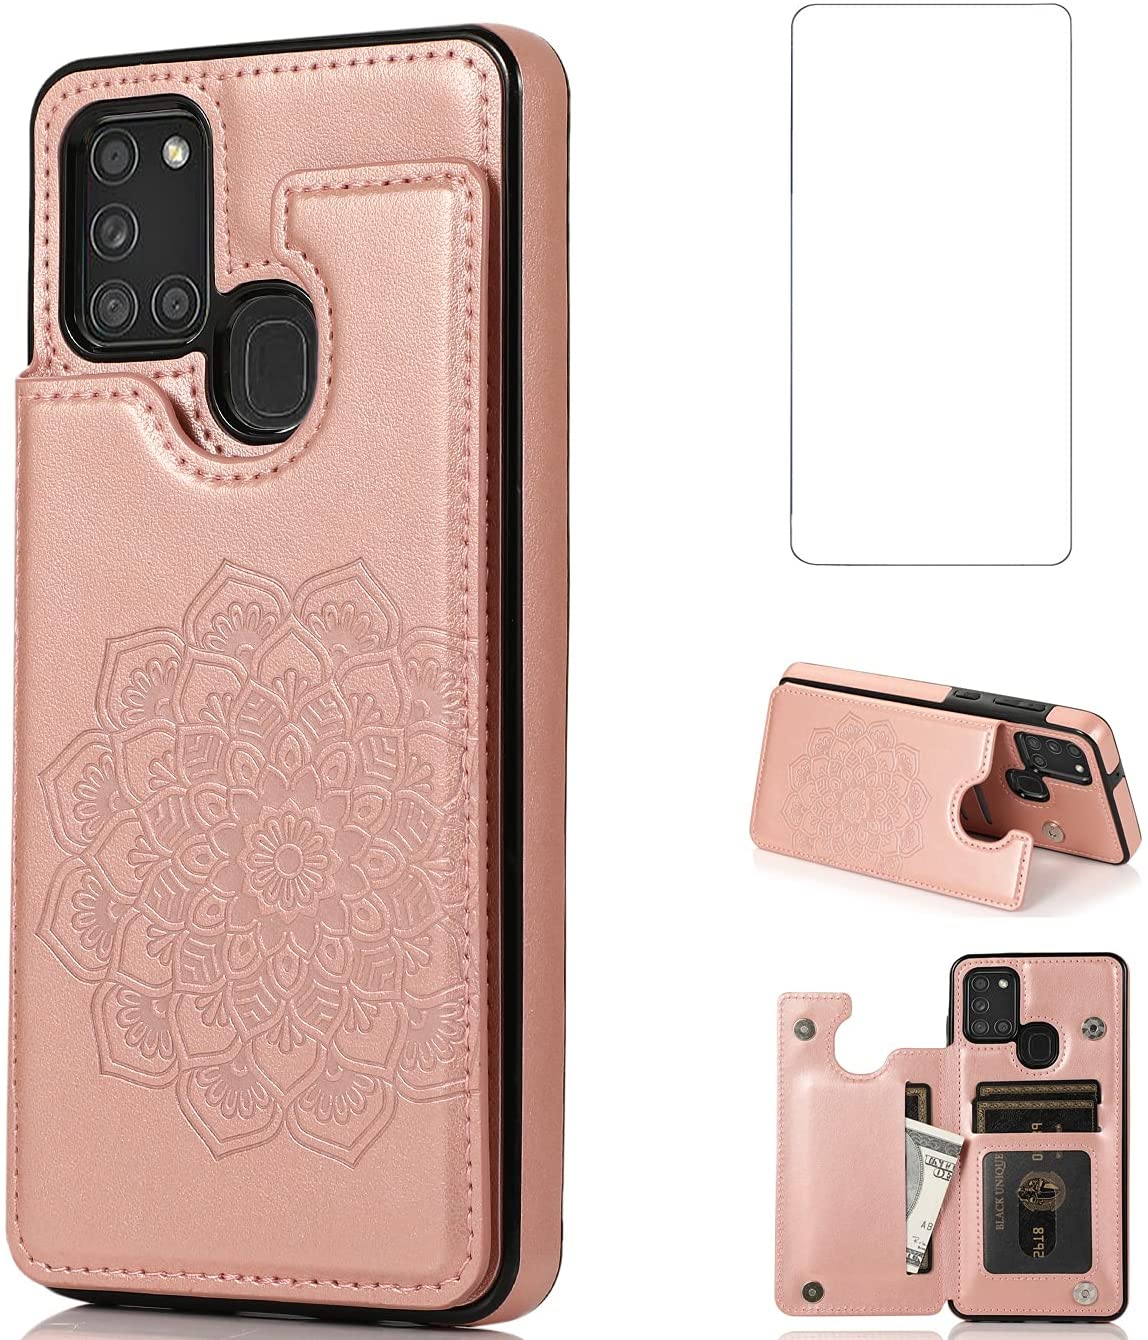 Asuwish Samsung Galaxy A21S Case, Tempered Glass Screen Protector Cover Cell Accessories Card Holder Slot Kickstand Flip Phone Cases Rose Gold